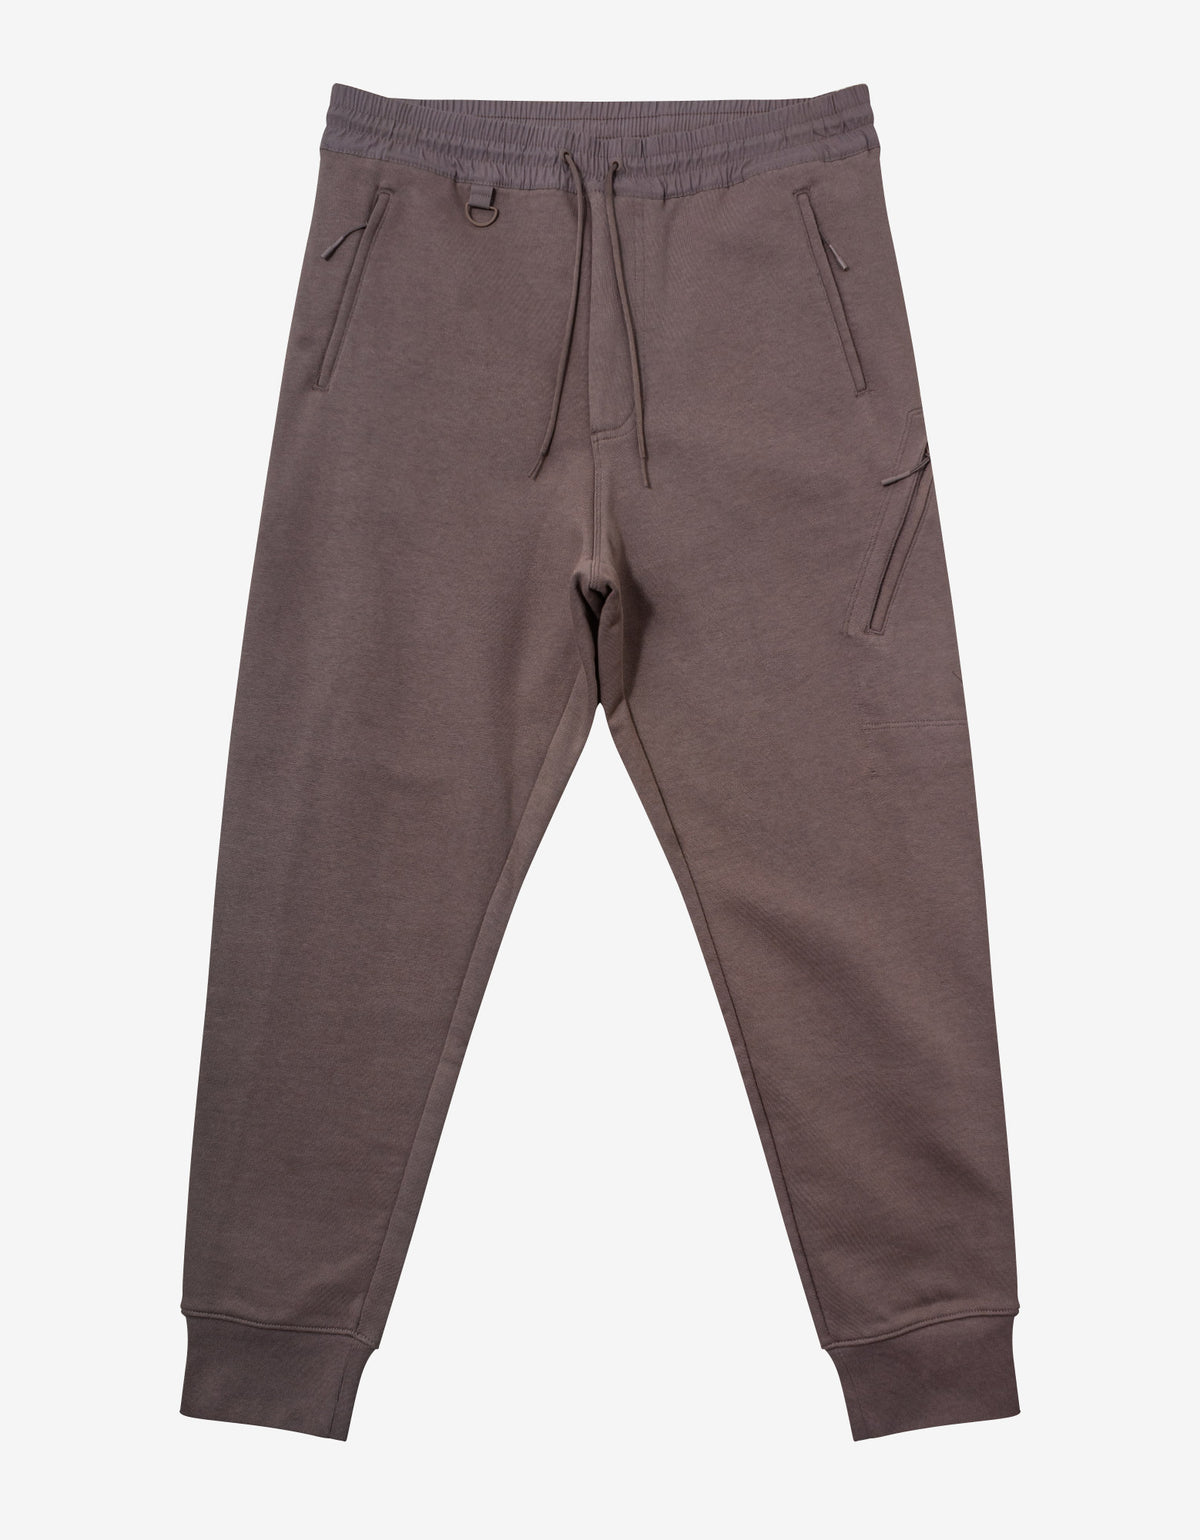 Y-3 Brown Classic DWR Terry Utility Sweat Pants